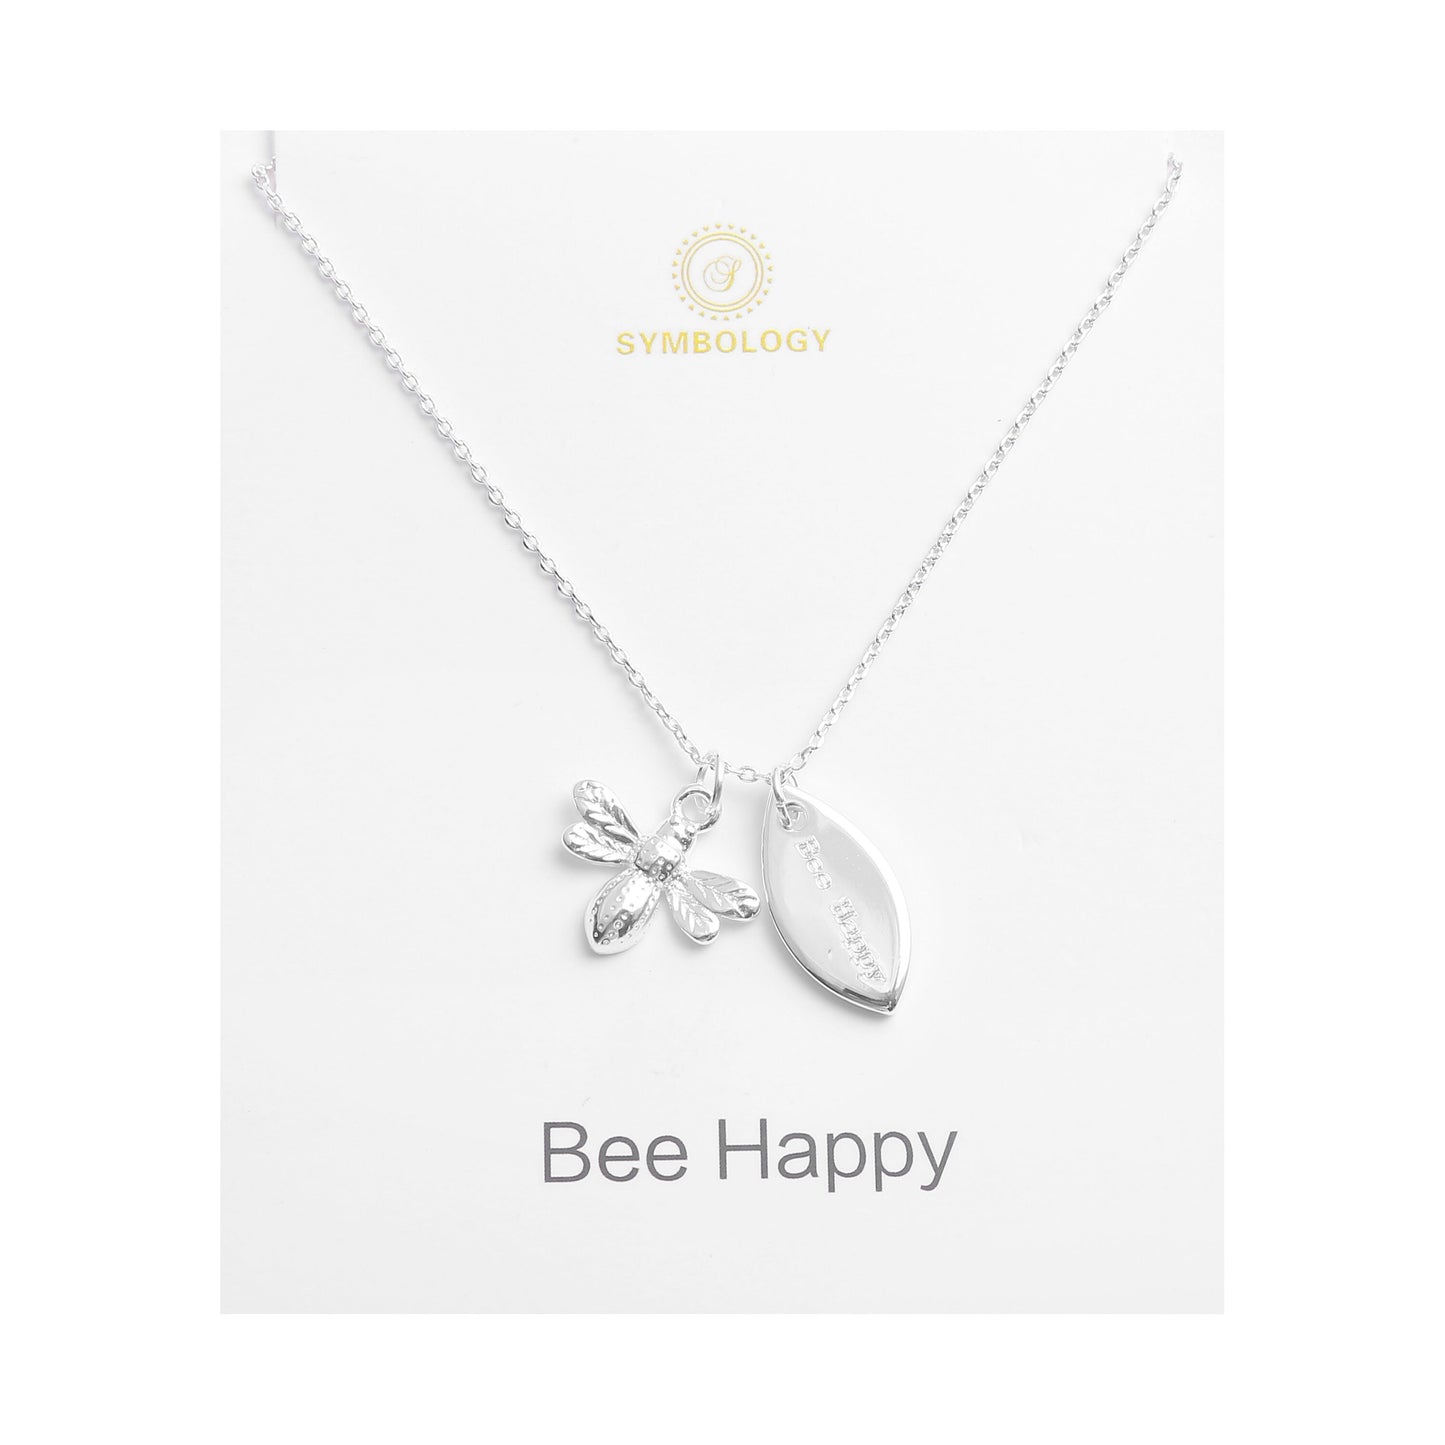 Personalised Bee Initial Pendant Necklace, Silver Bee Charm Necklace, Birthstone Initial Pendant, Sentimental Gift for Women, Gift for Her,